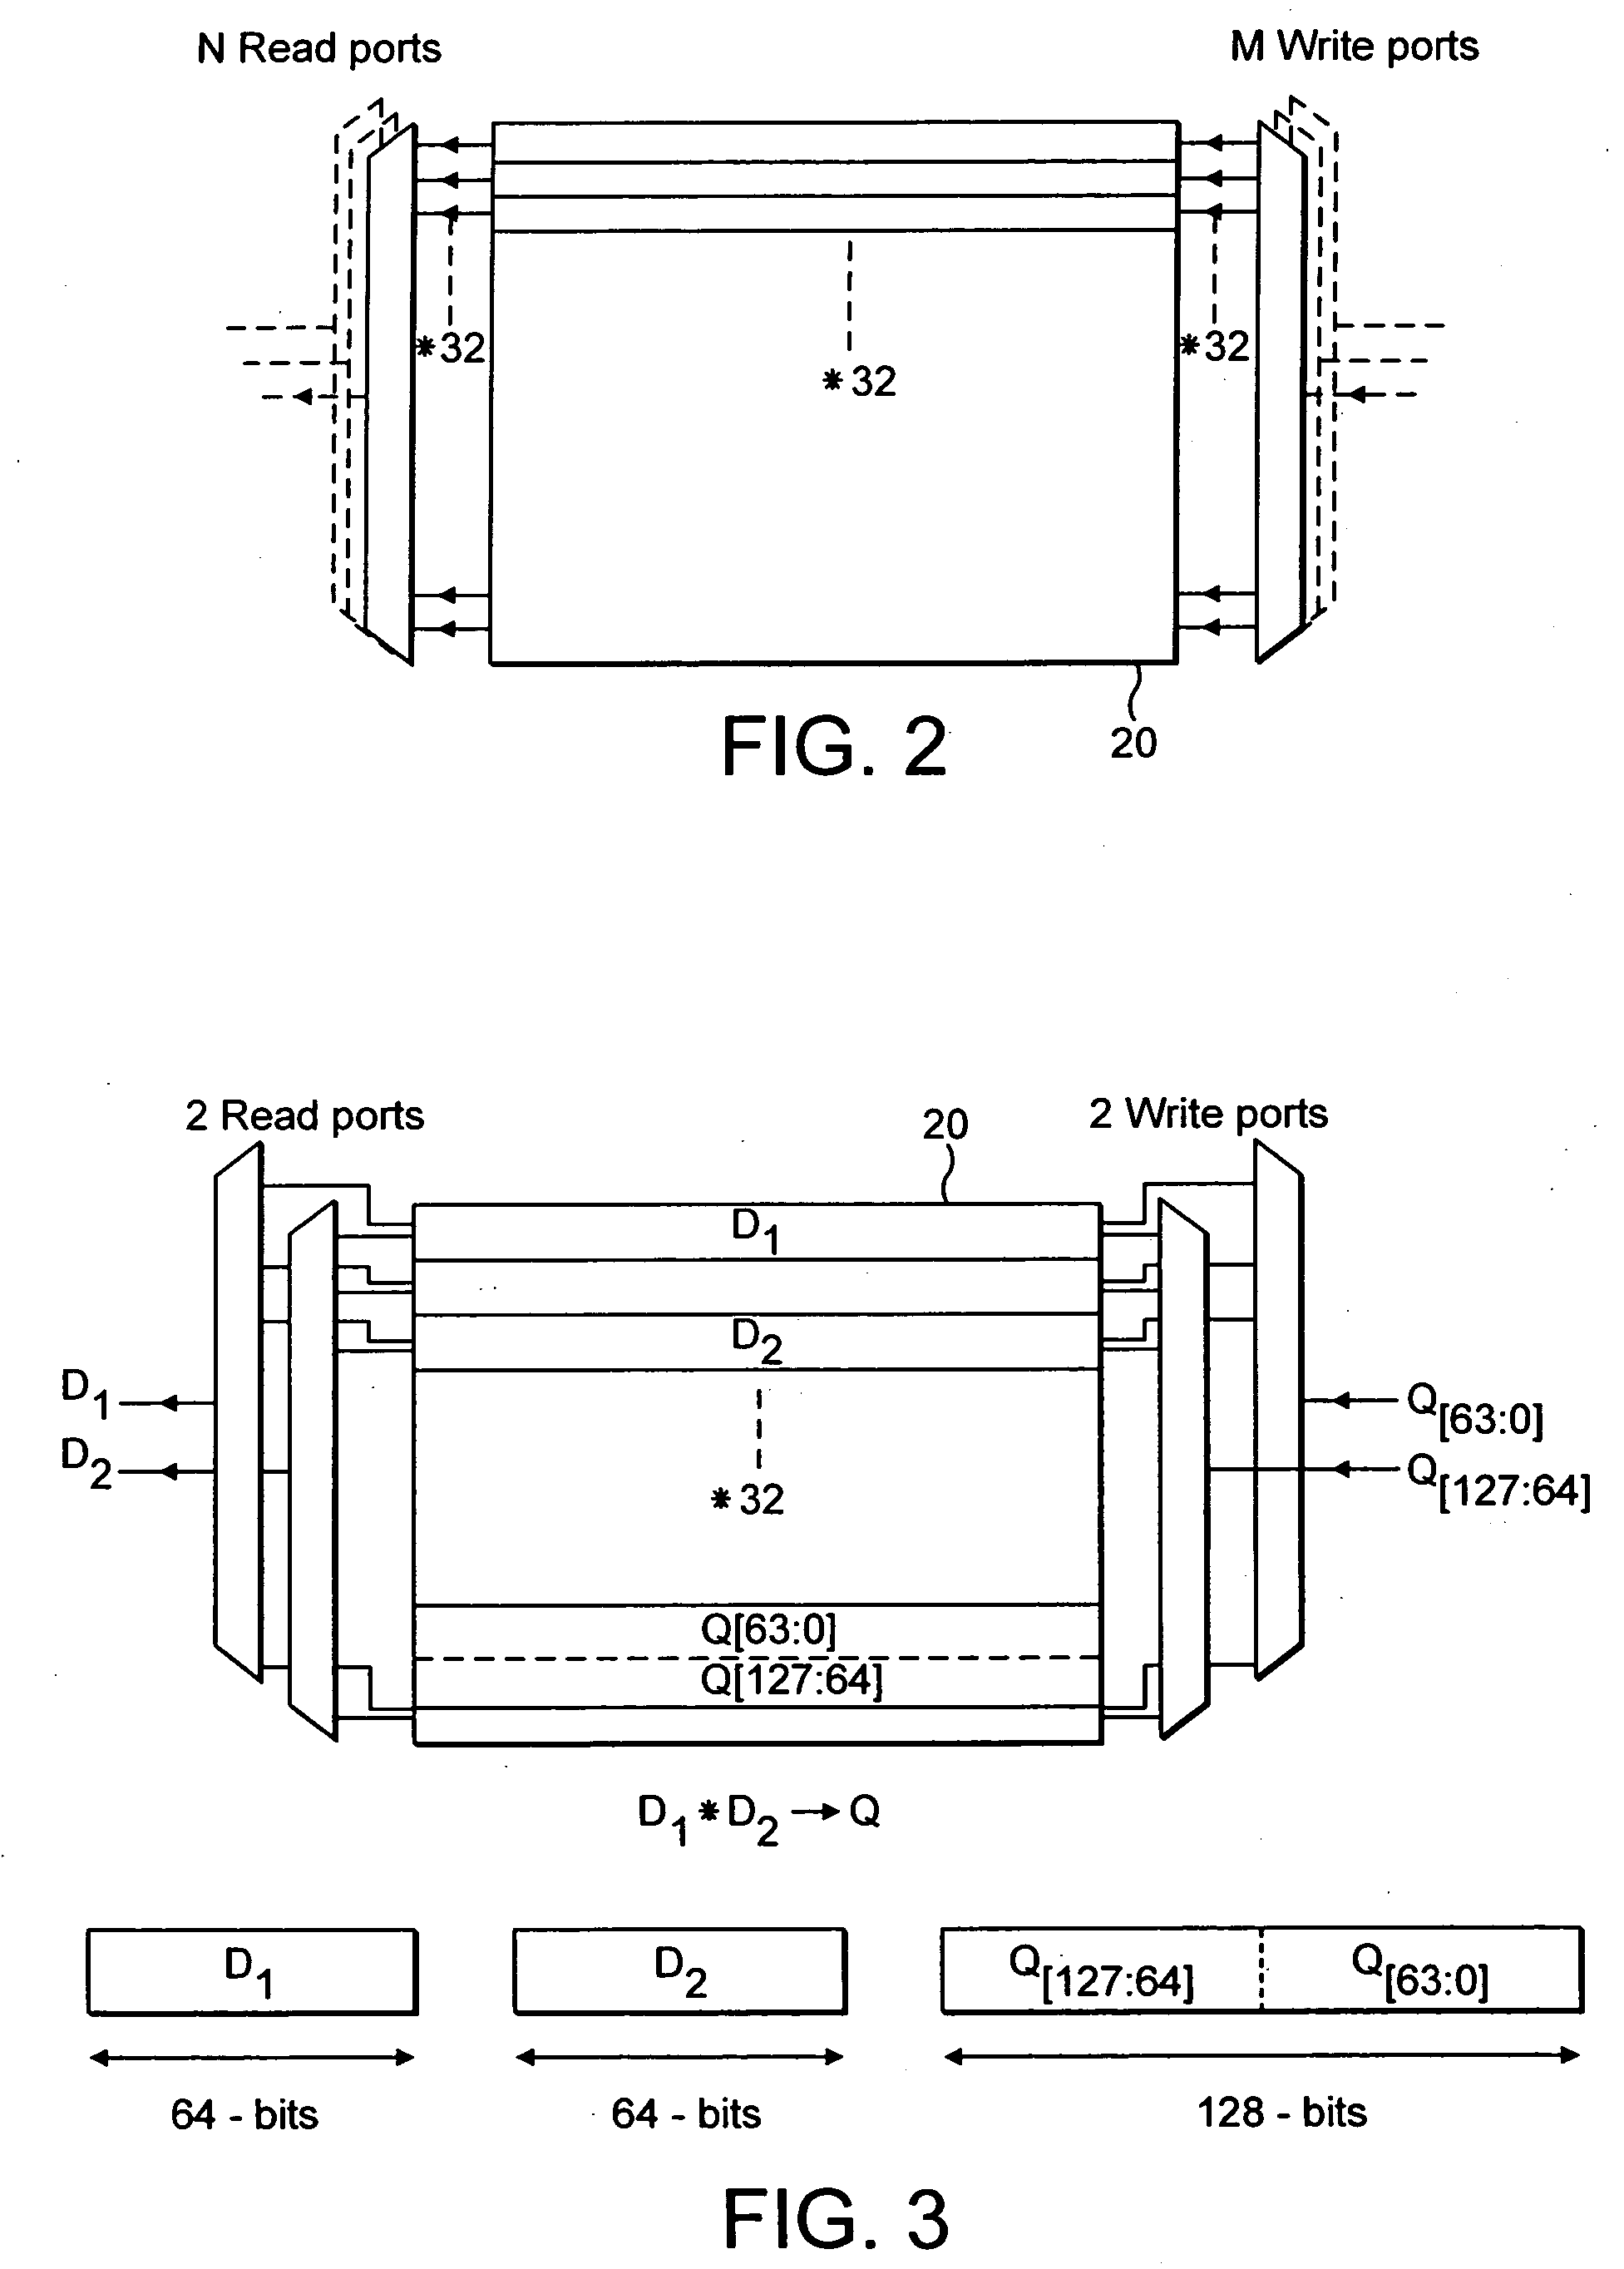 Table lookup operation within a data processing system